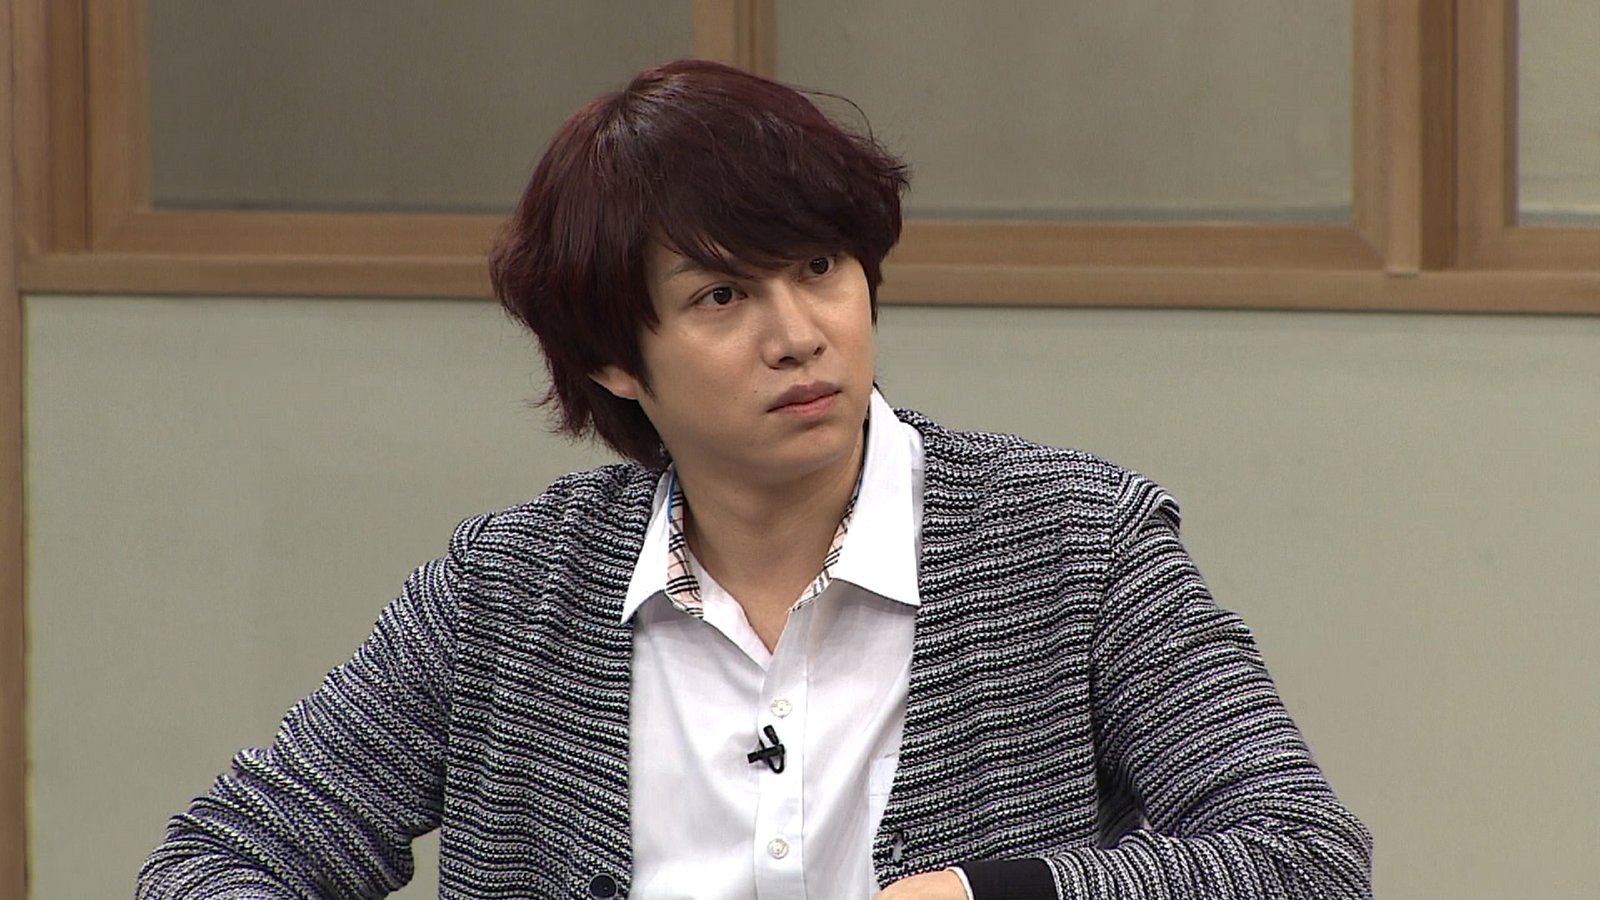 Super Junior Kim Hee-chul, Attended the Police Station on July 24 to Qualify as a Accuser of the Malicious Commenter